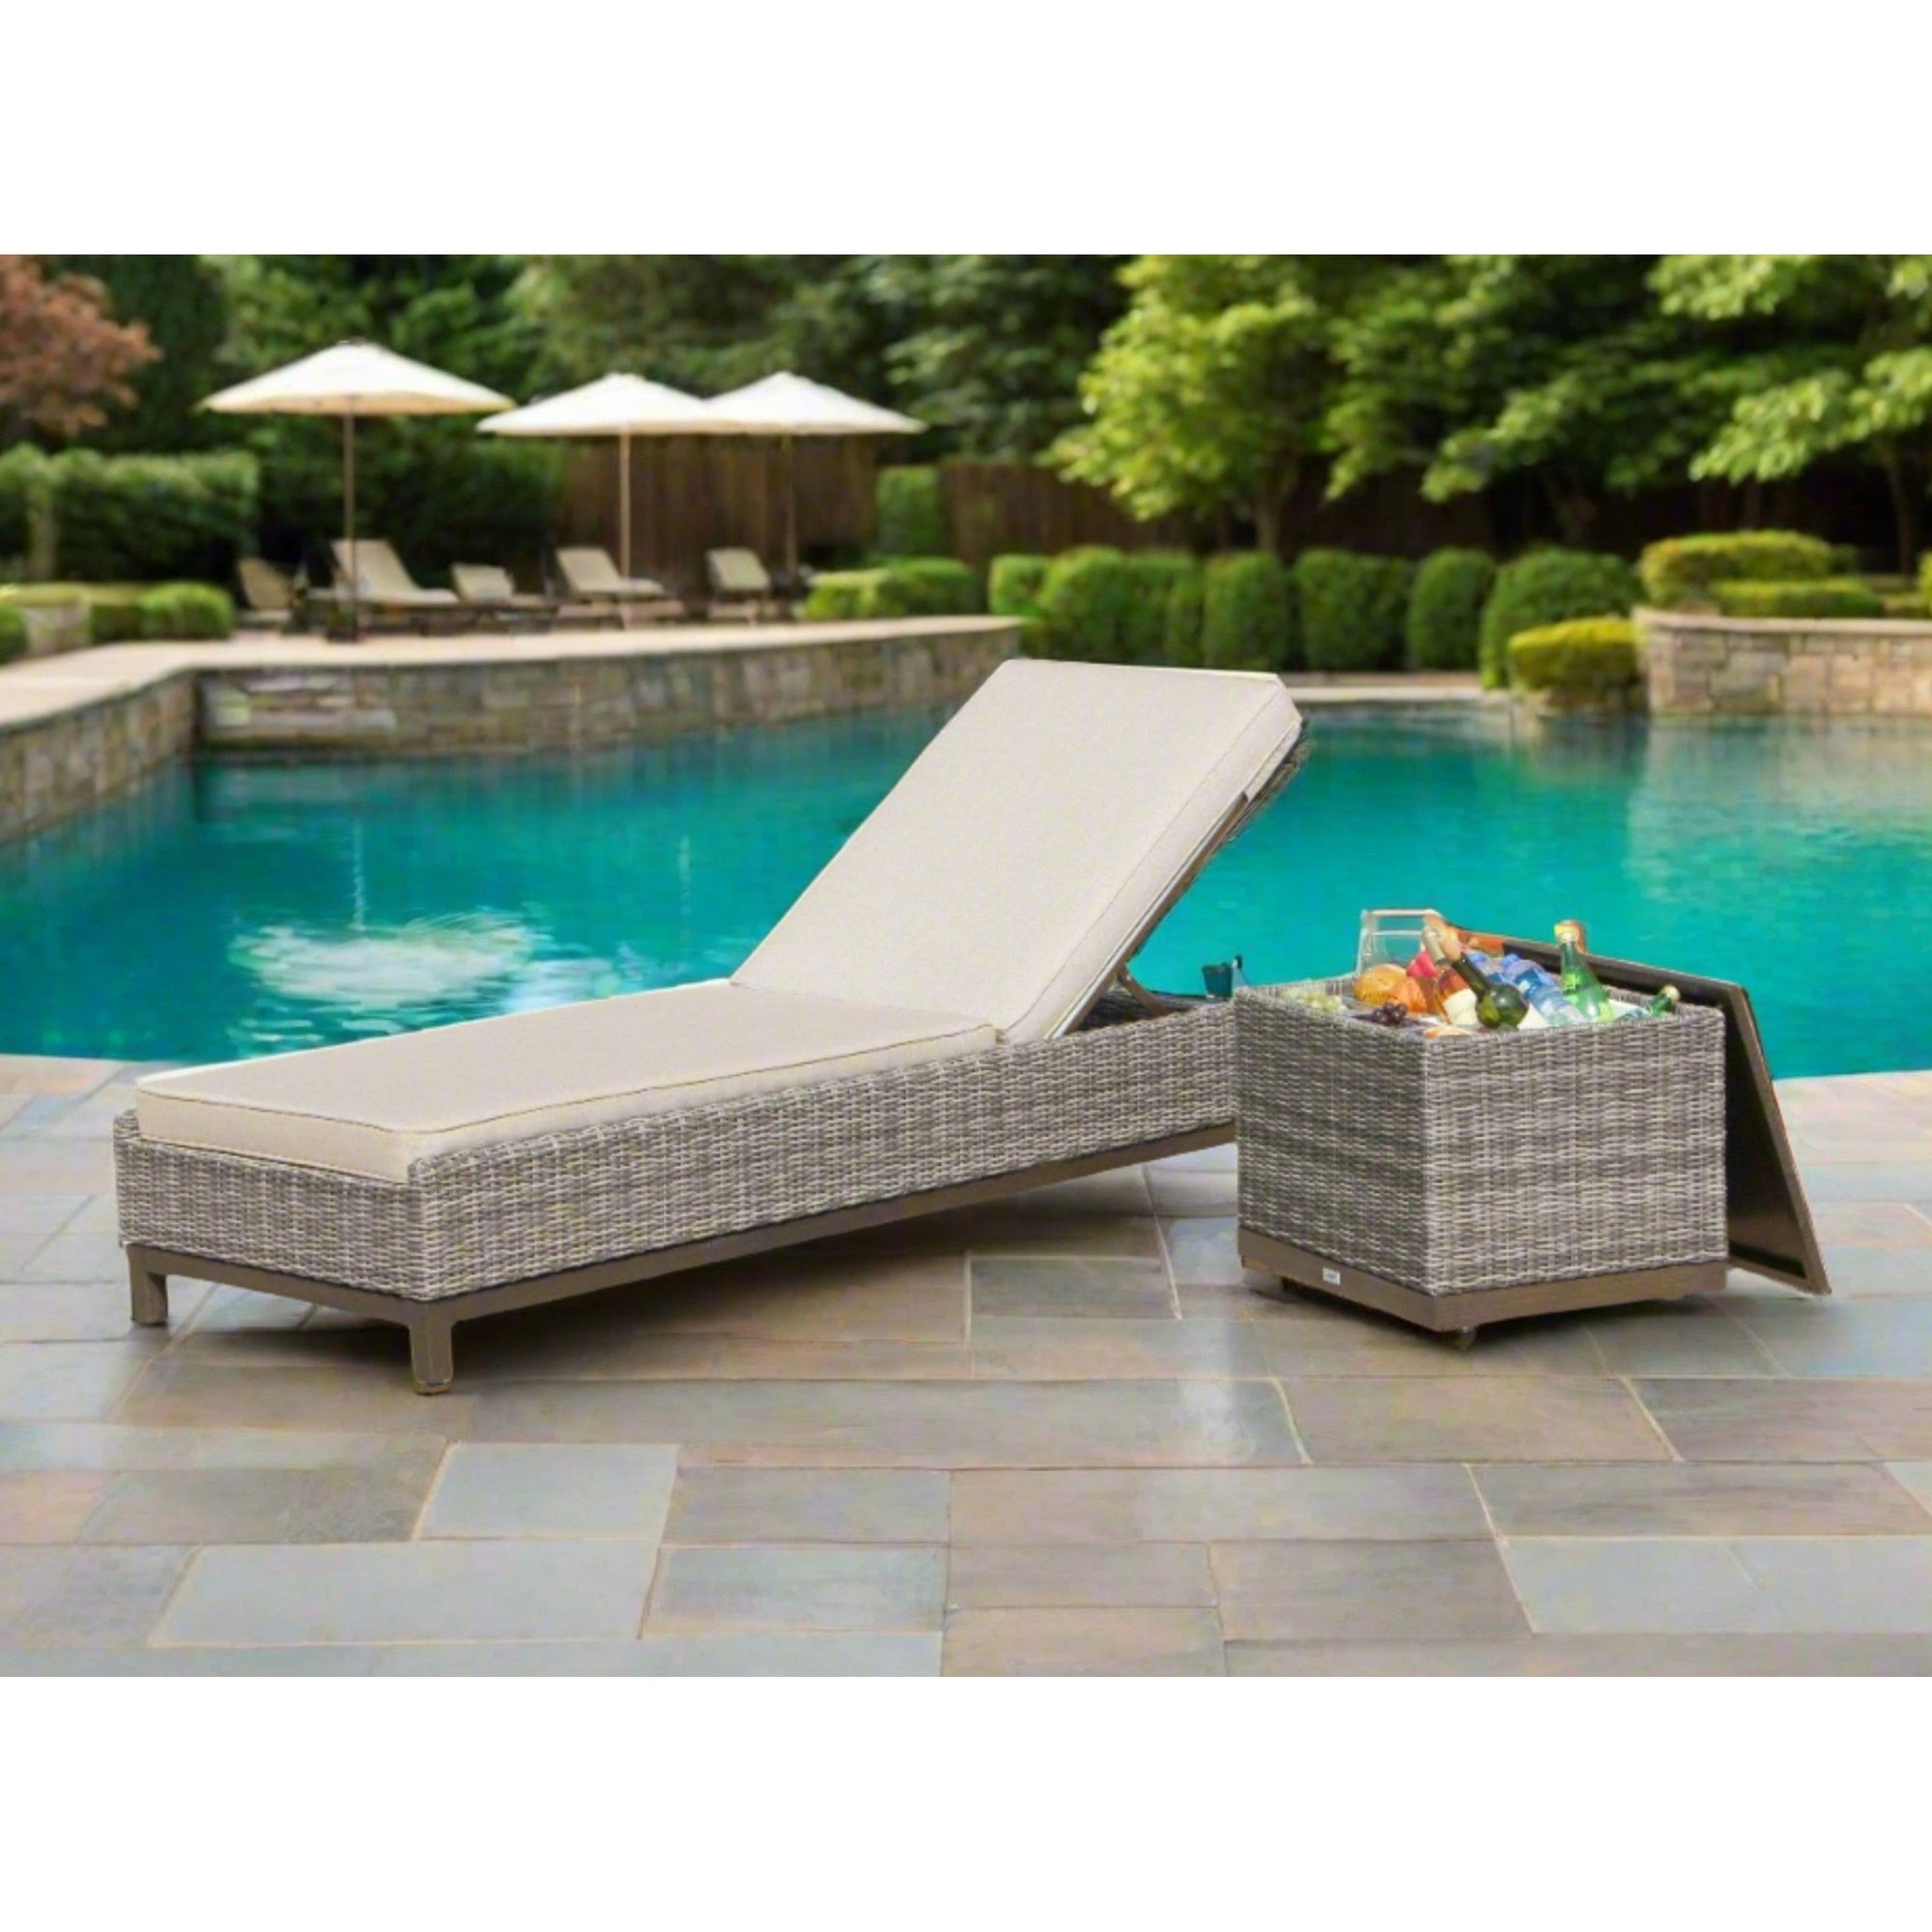 Naples Outdoor Sling Pool Chaise with Cushion